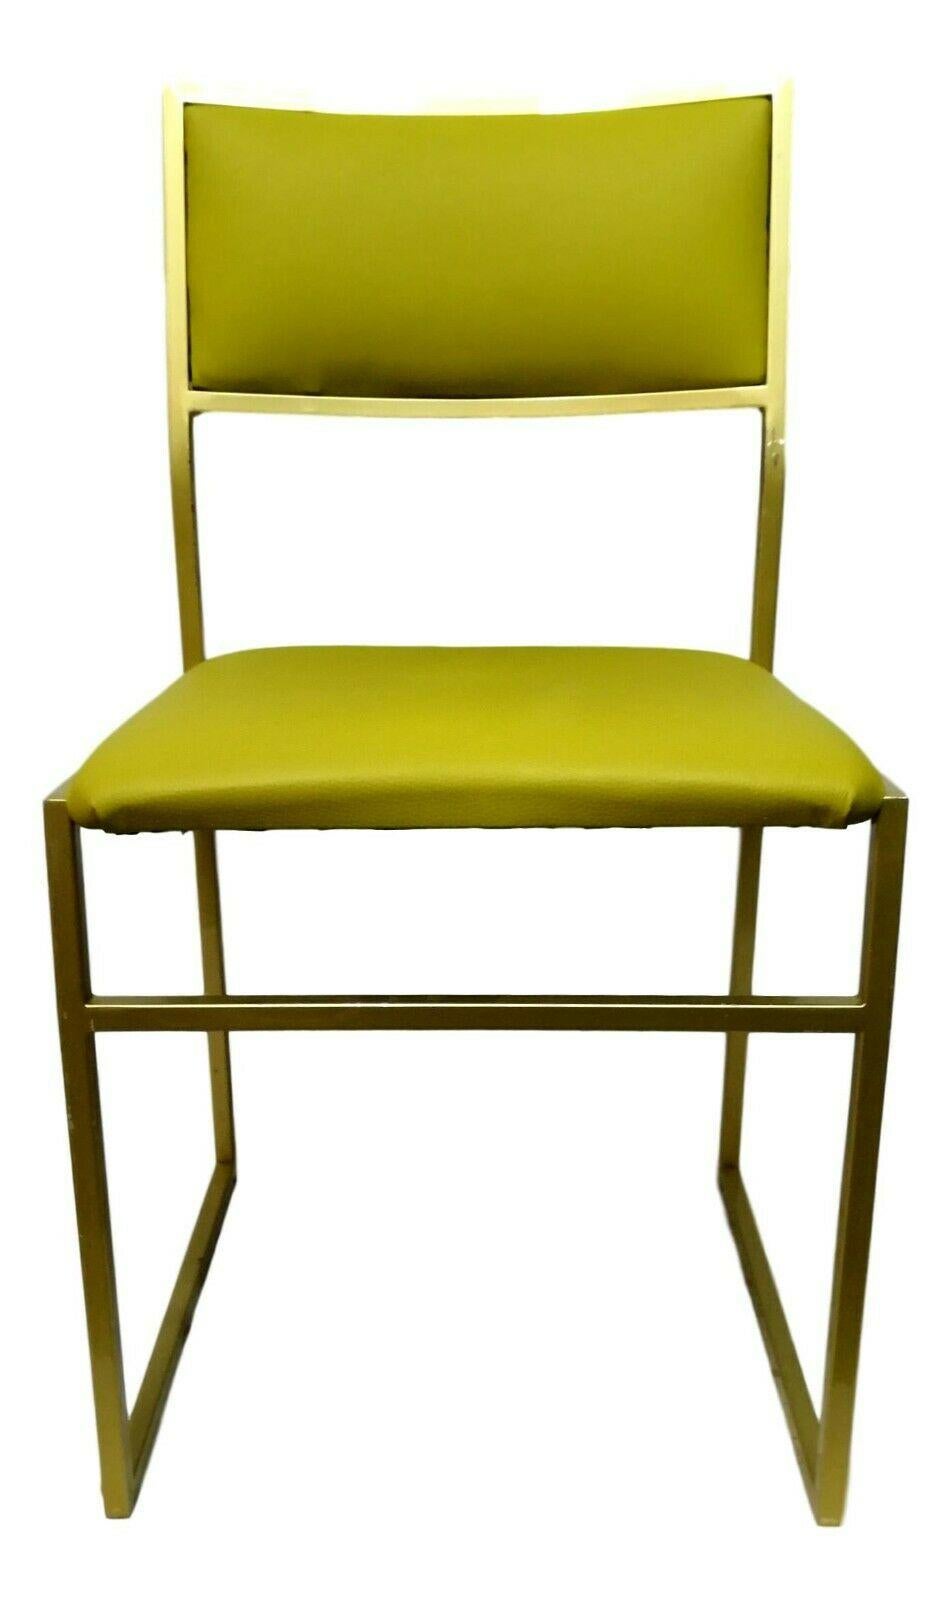 Collectible Chair in Gold Metal and Acid Green Upholstery, 1970s For Sale 1